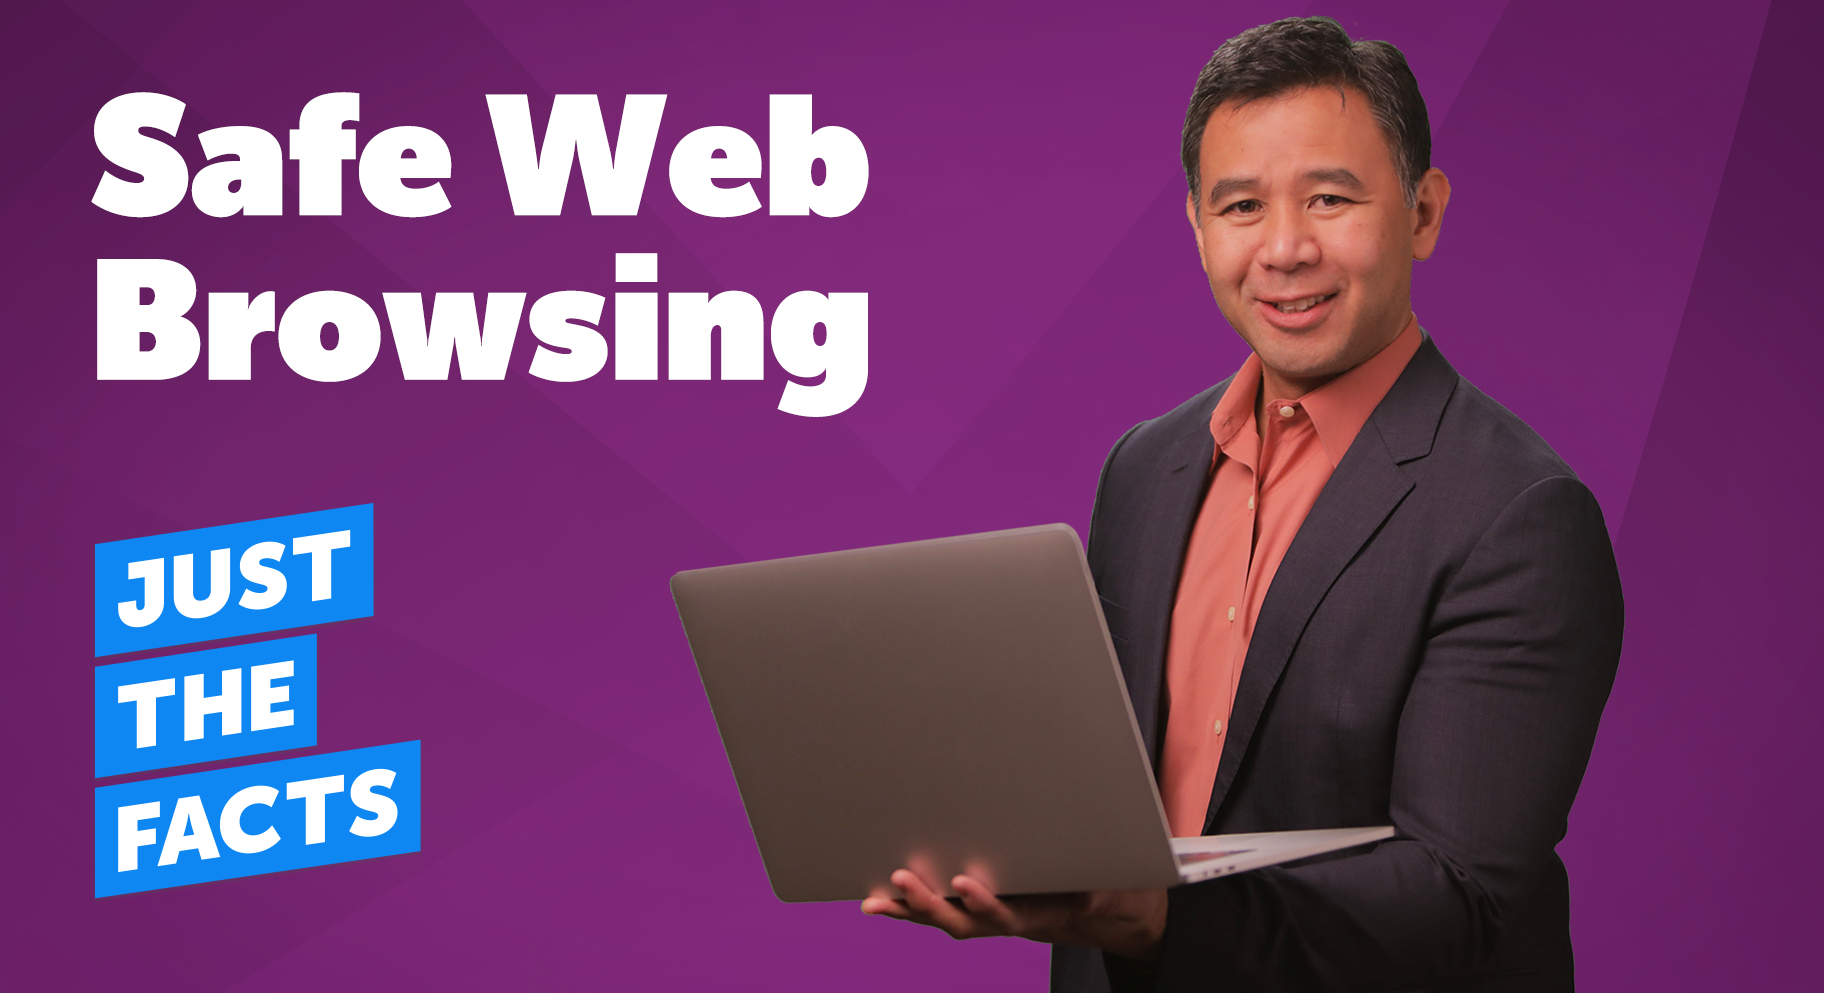 Just the Facts: Safe Web Browsing